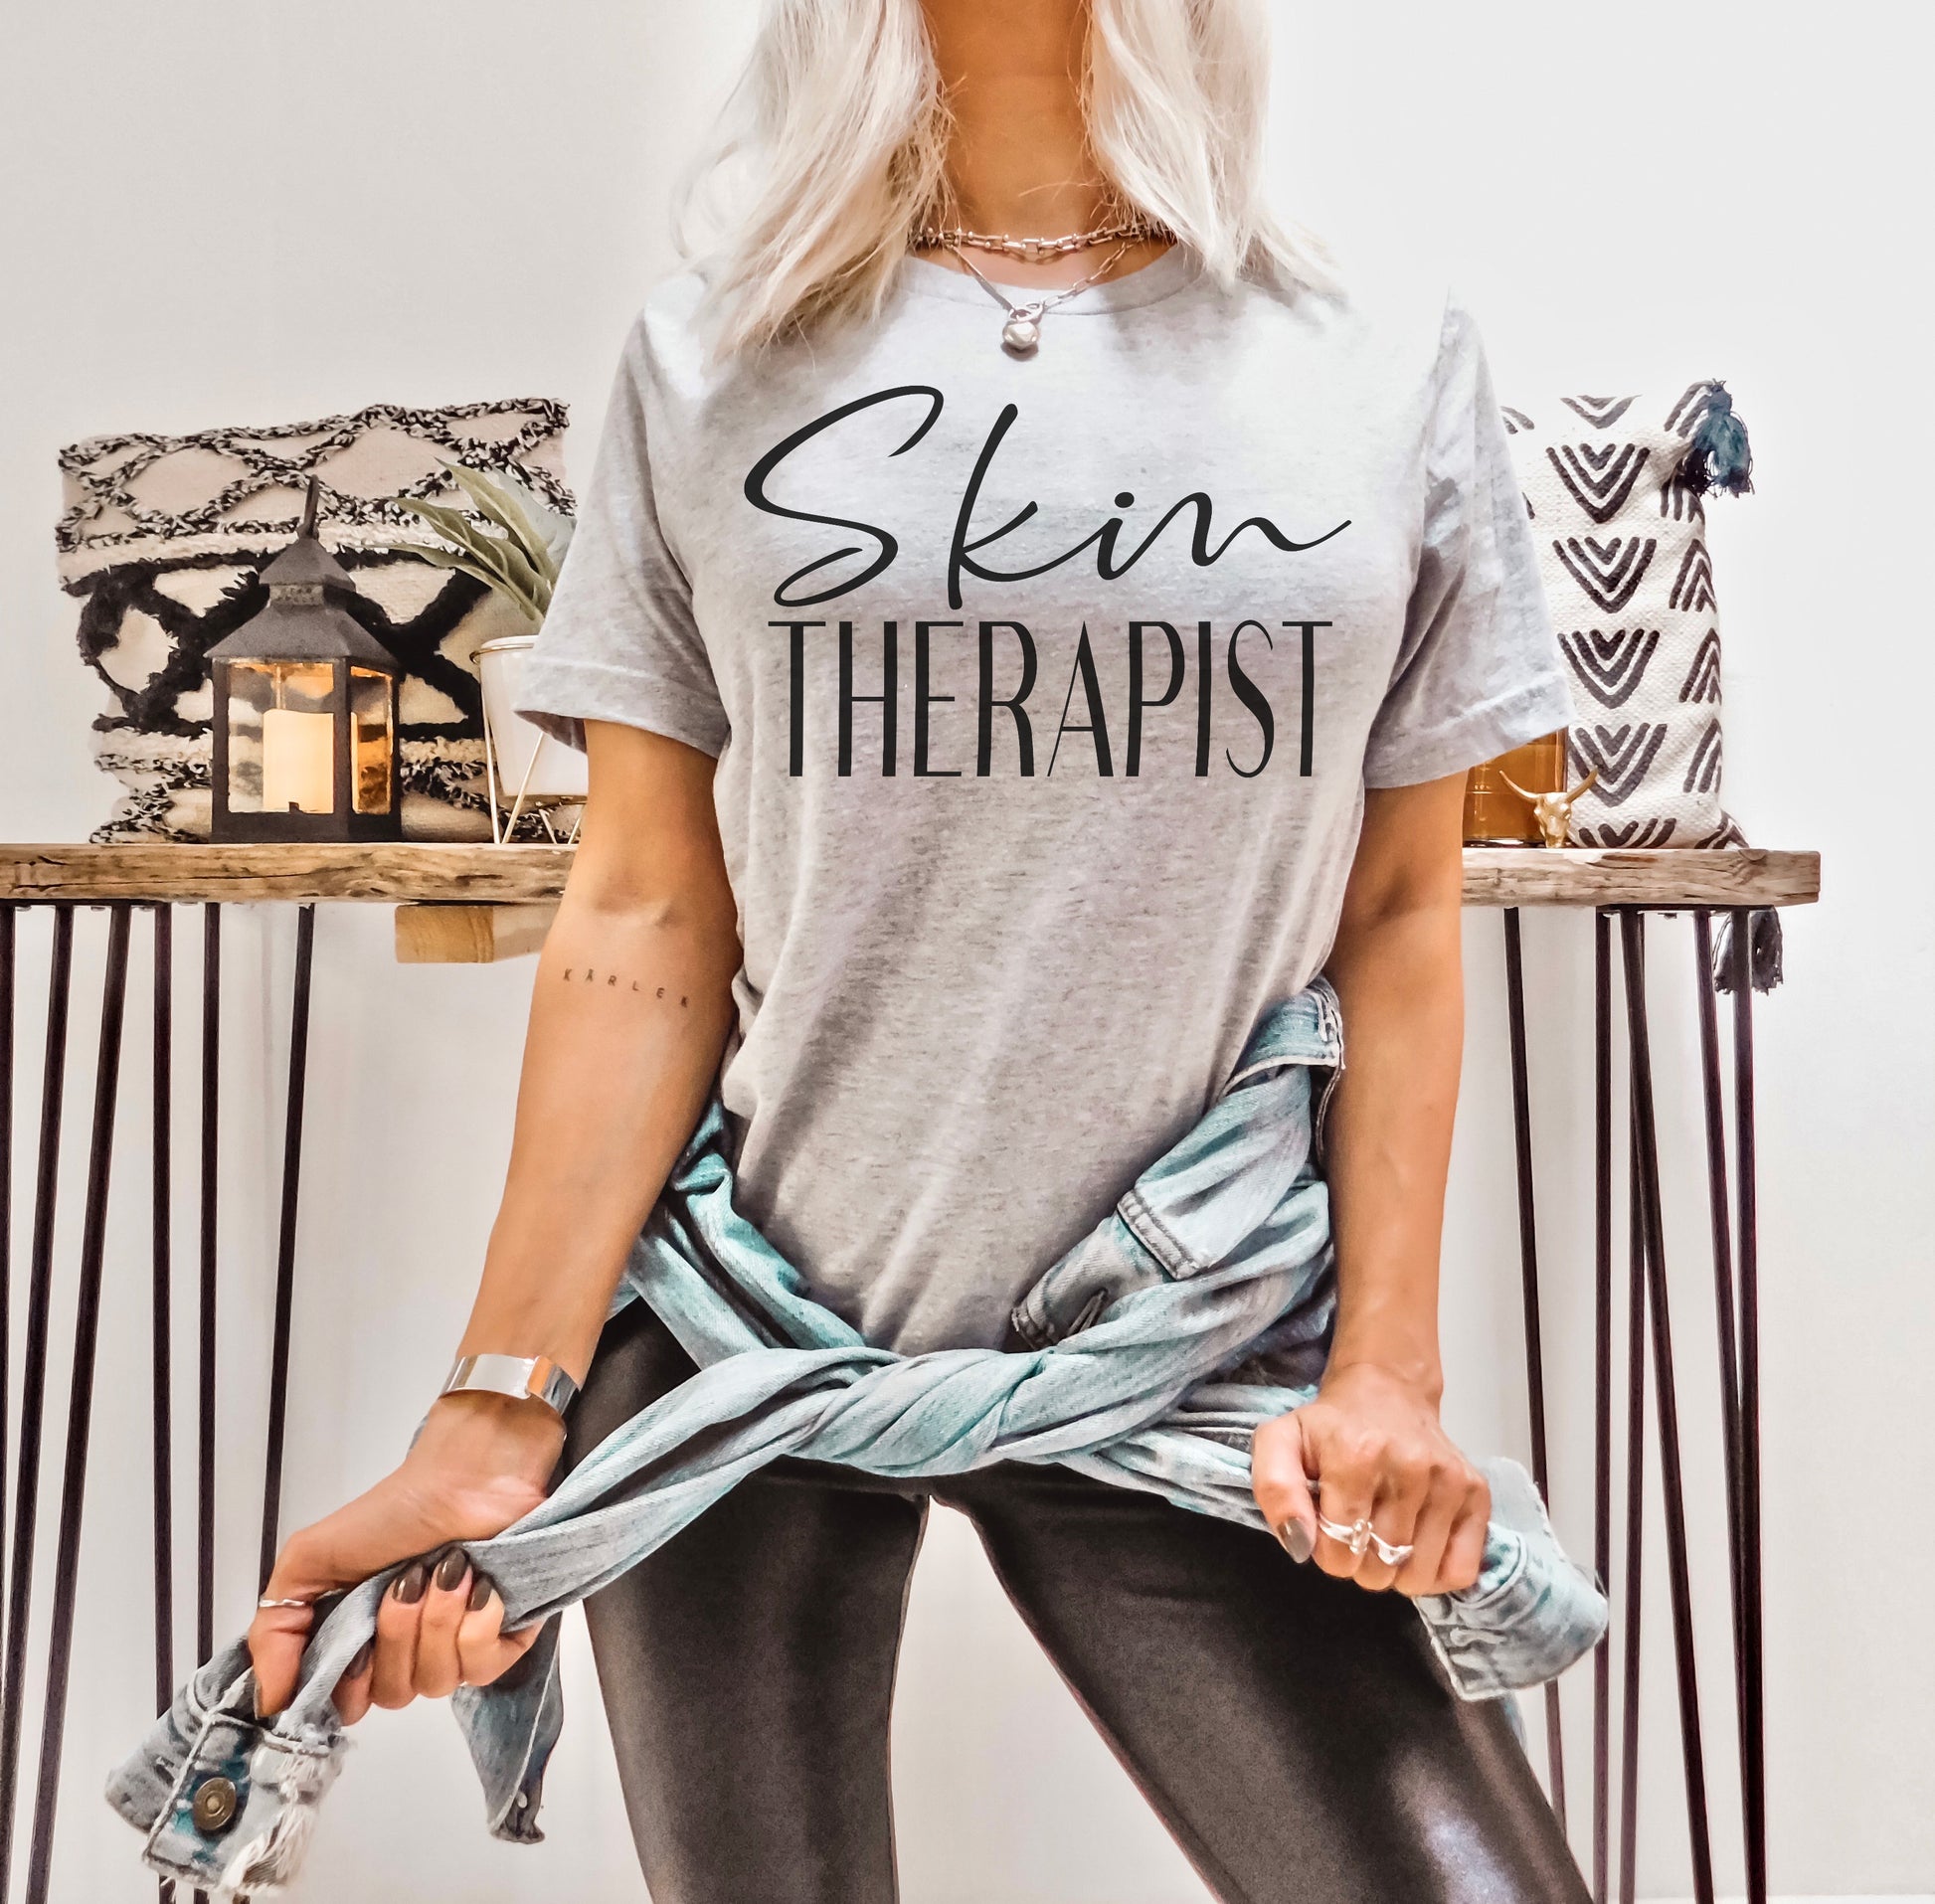 Designs by Prim Skin Therapist Soft Unisex T-Shirt | Make Up Facial Aesthetician Lashing Microneedling Glam Team Cosmetology Graphic Tee Top